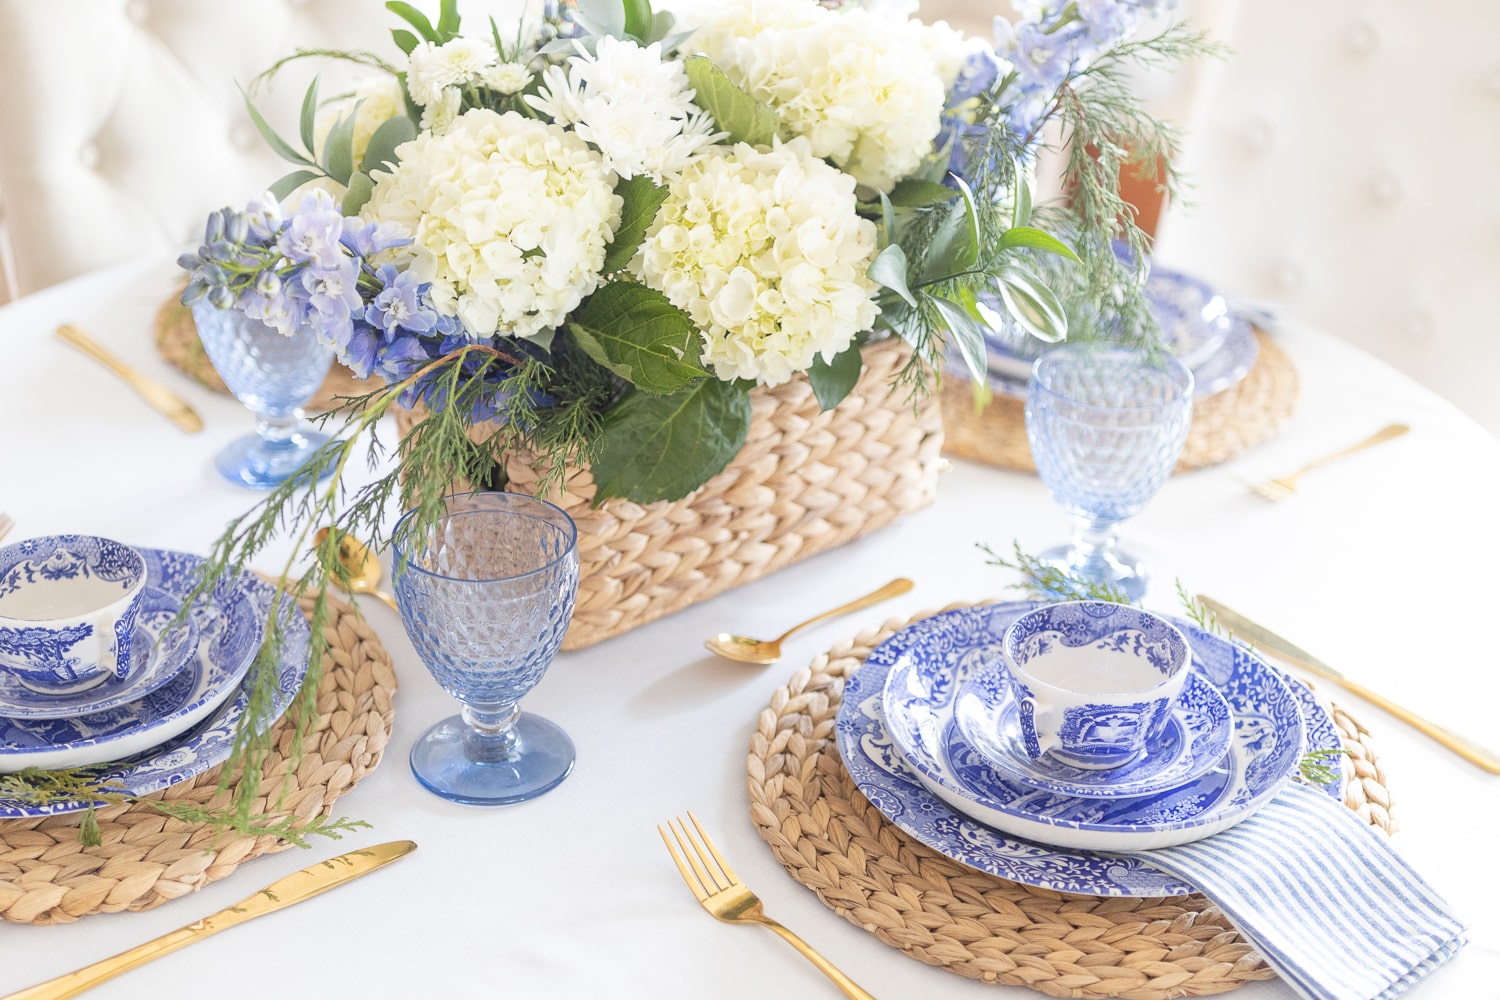 Spode blue Italian dinnerware and blue Villeroy and Boch goblets styled in a coastal winter tablescape by southern lifestyle blogger Stephanie Ziajka on Diary of a Debutante